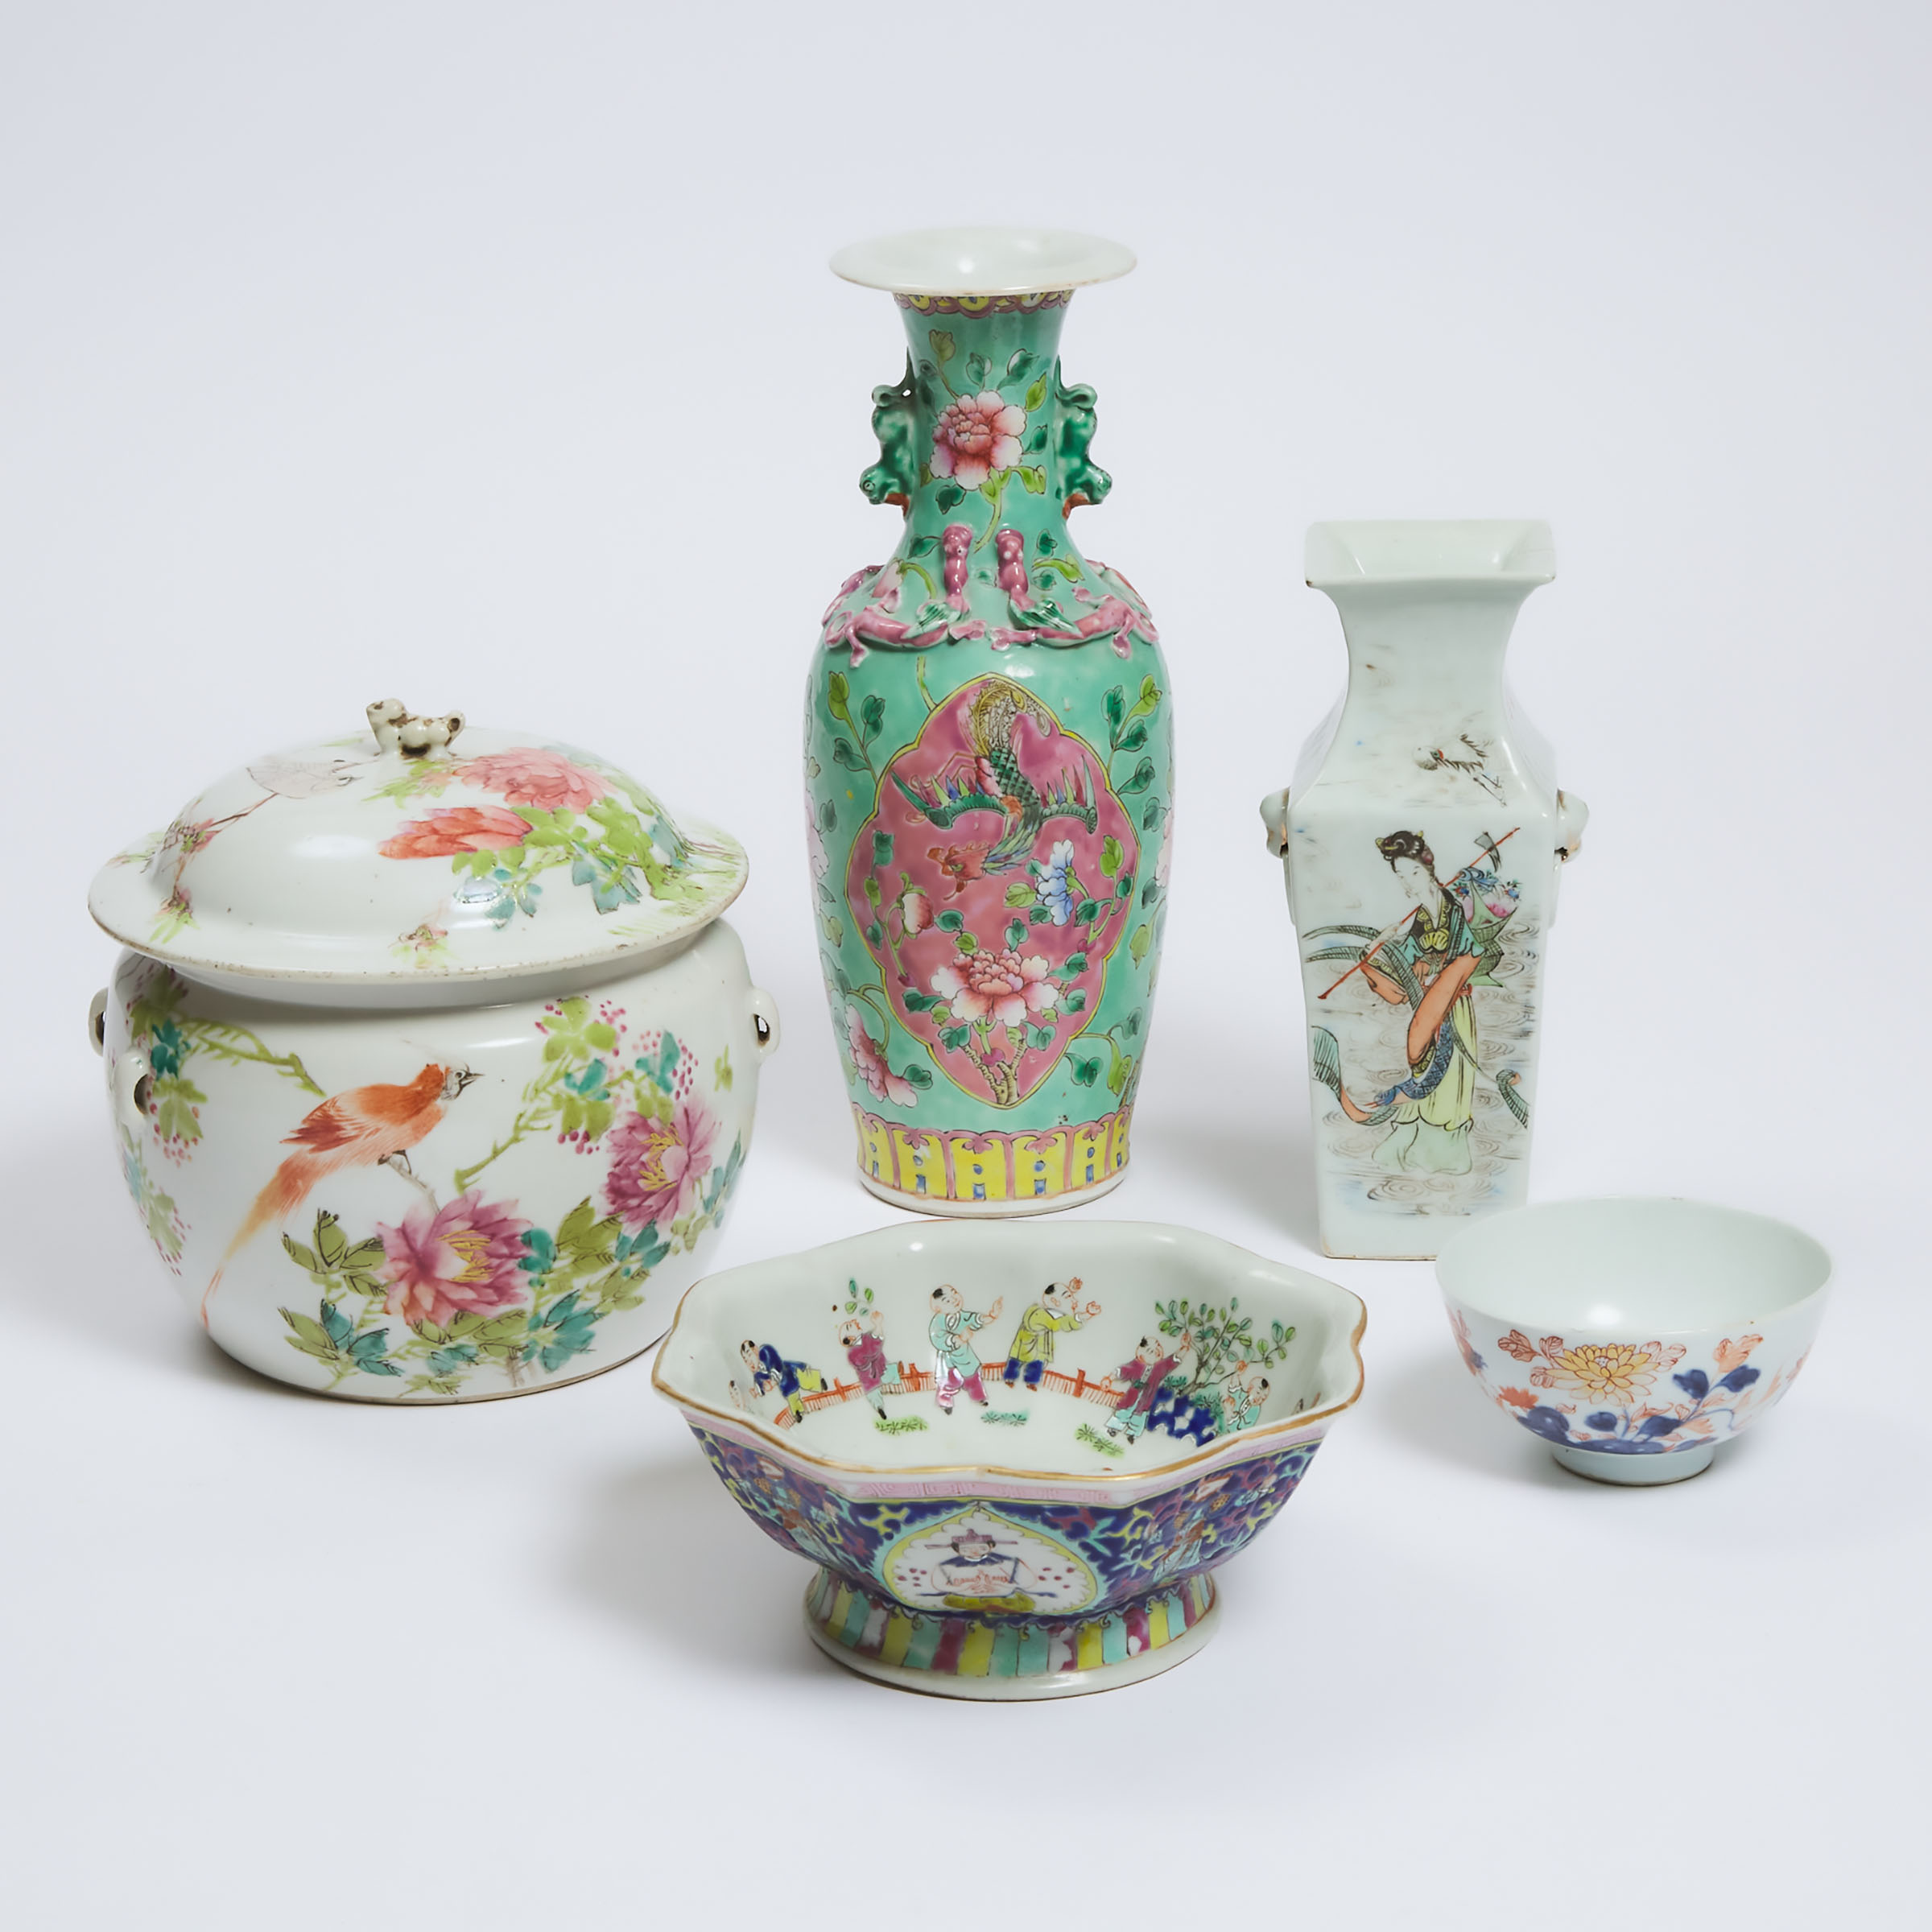 A Group of Five Enameled Porcelain Wares, Kangxi to Republican Period, 17th-Early 20th Century